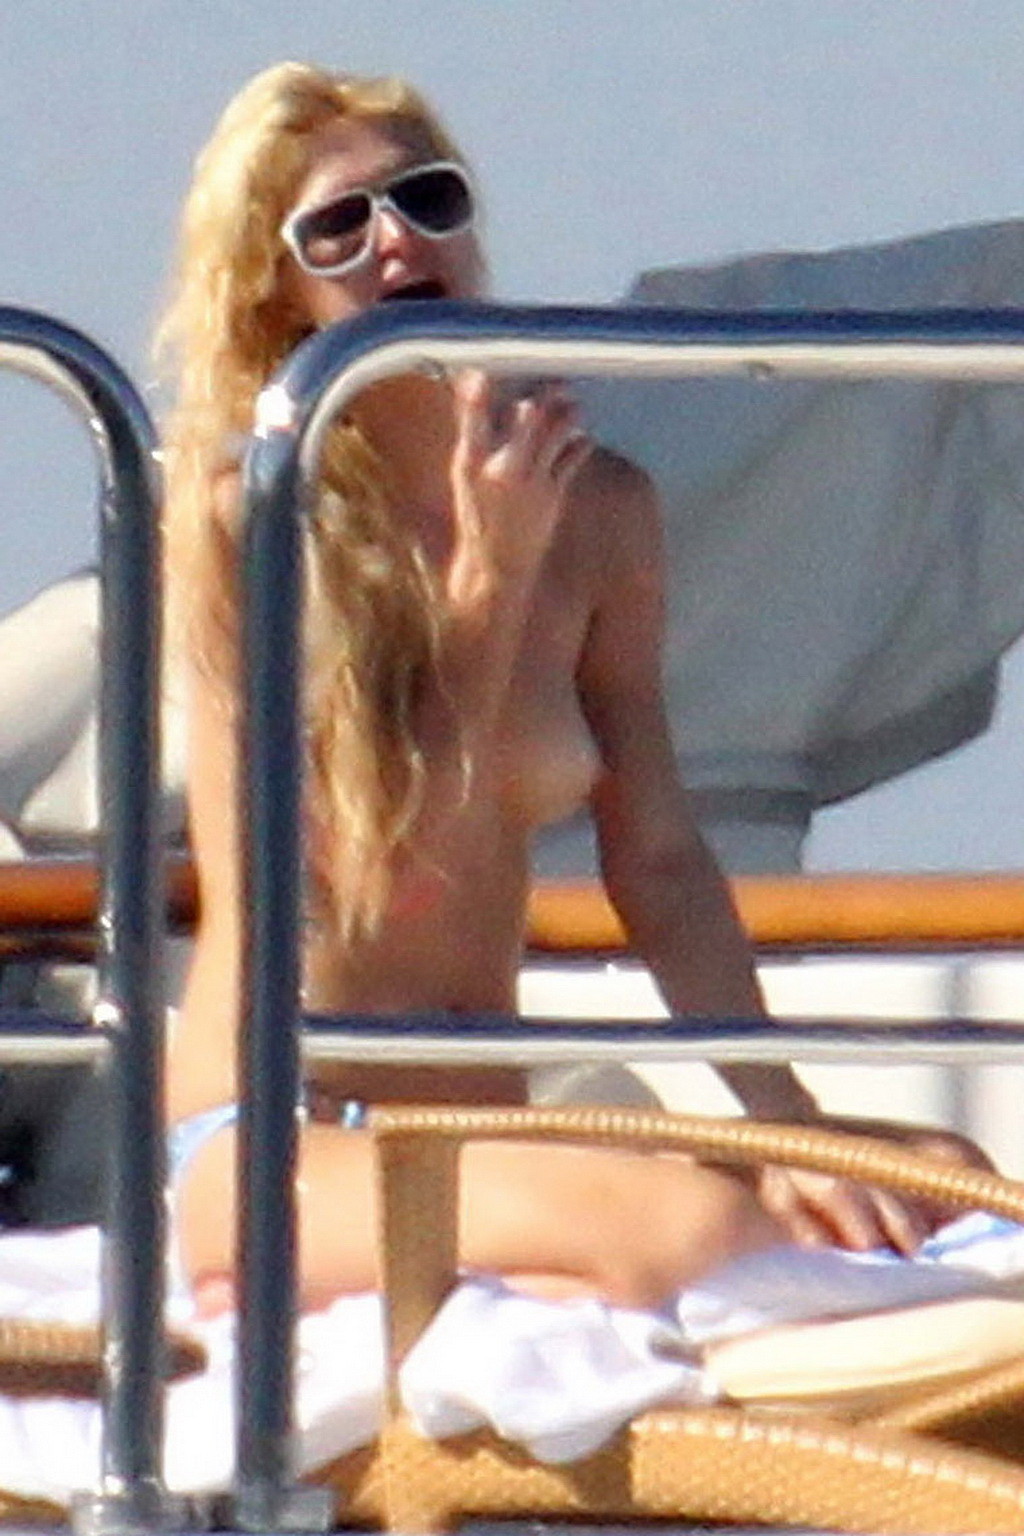 Paris Hilton topless showing off her small tits on a yacht in Italy #75340730